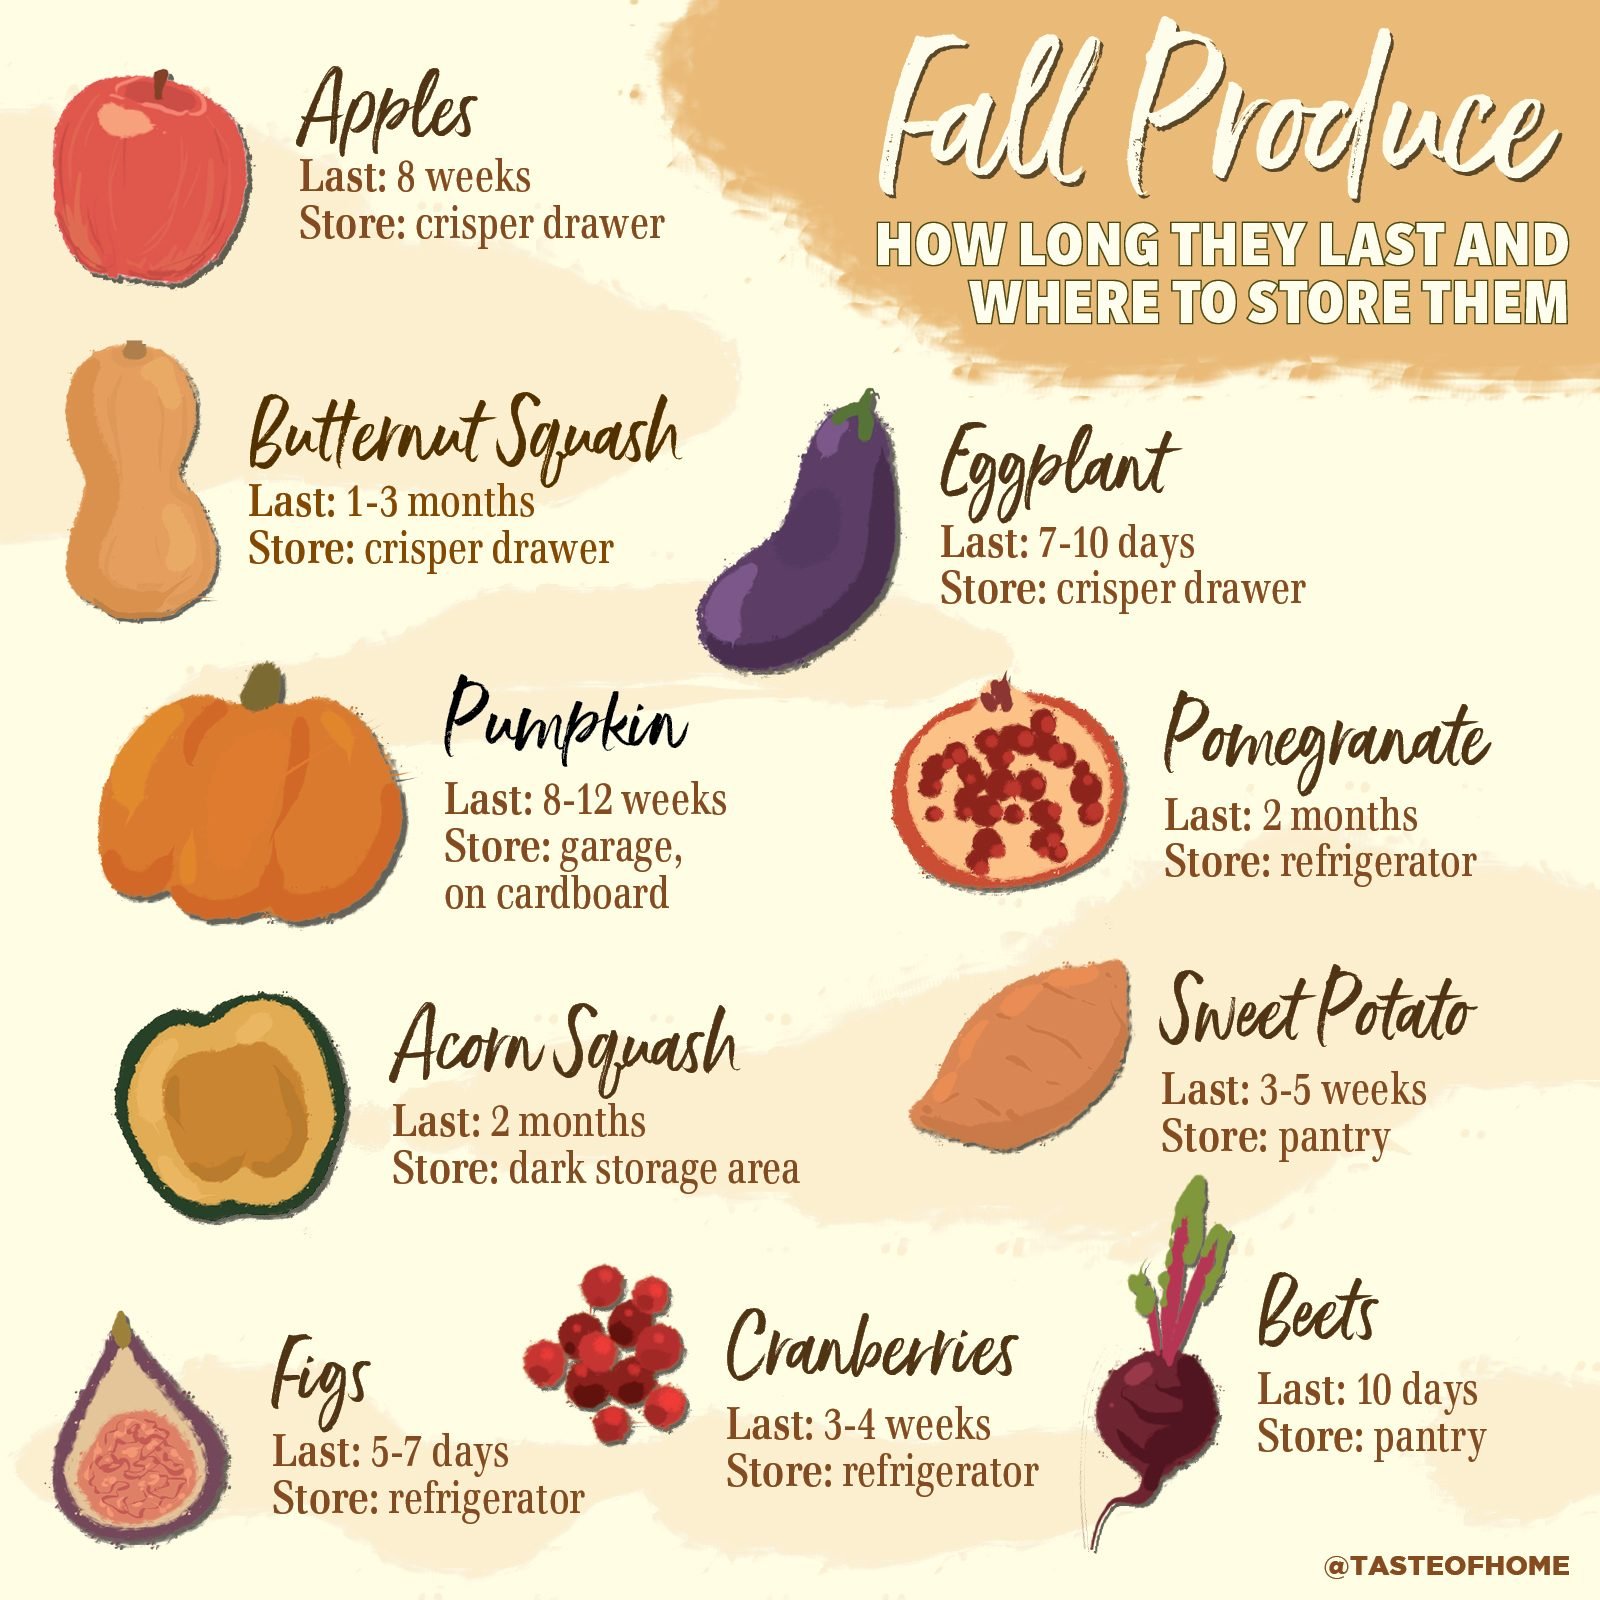 Fall Produce: How to Cook How to Store What to Make